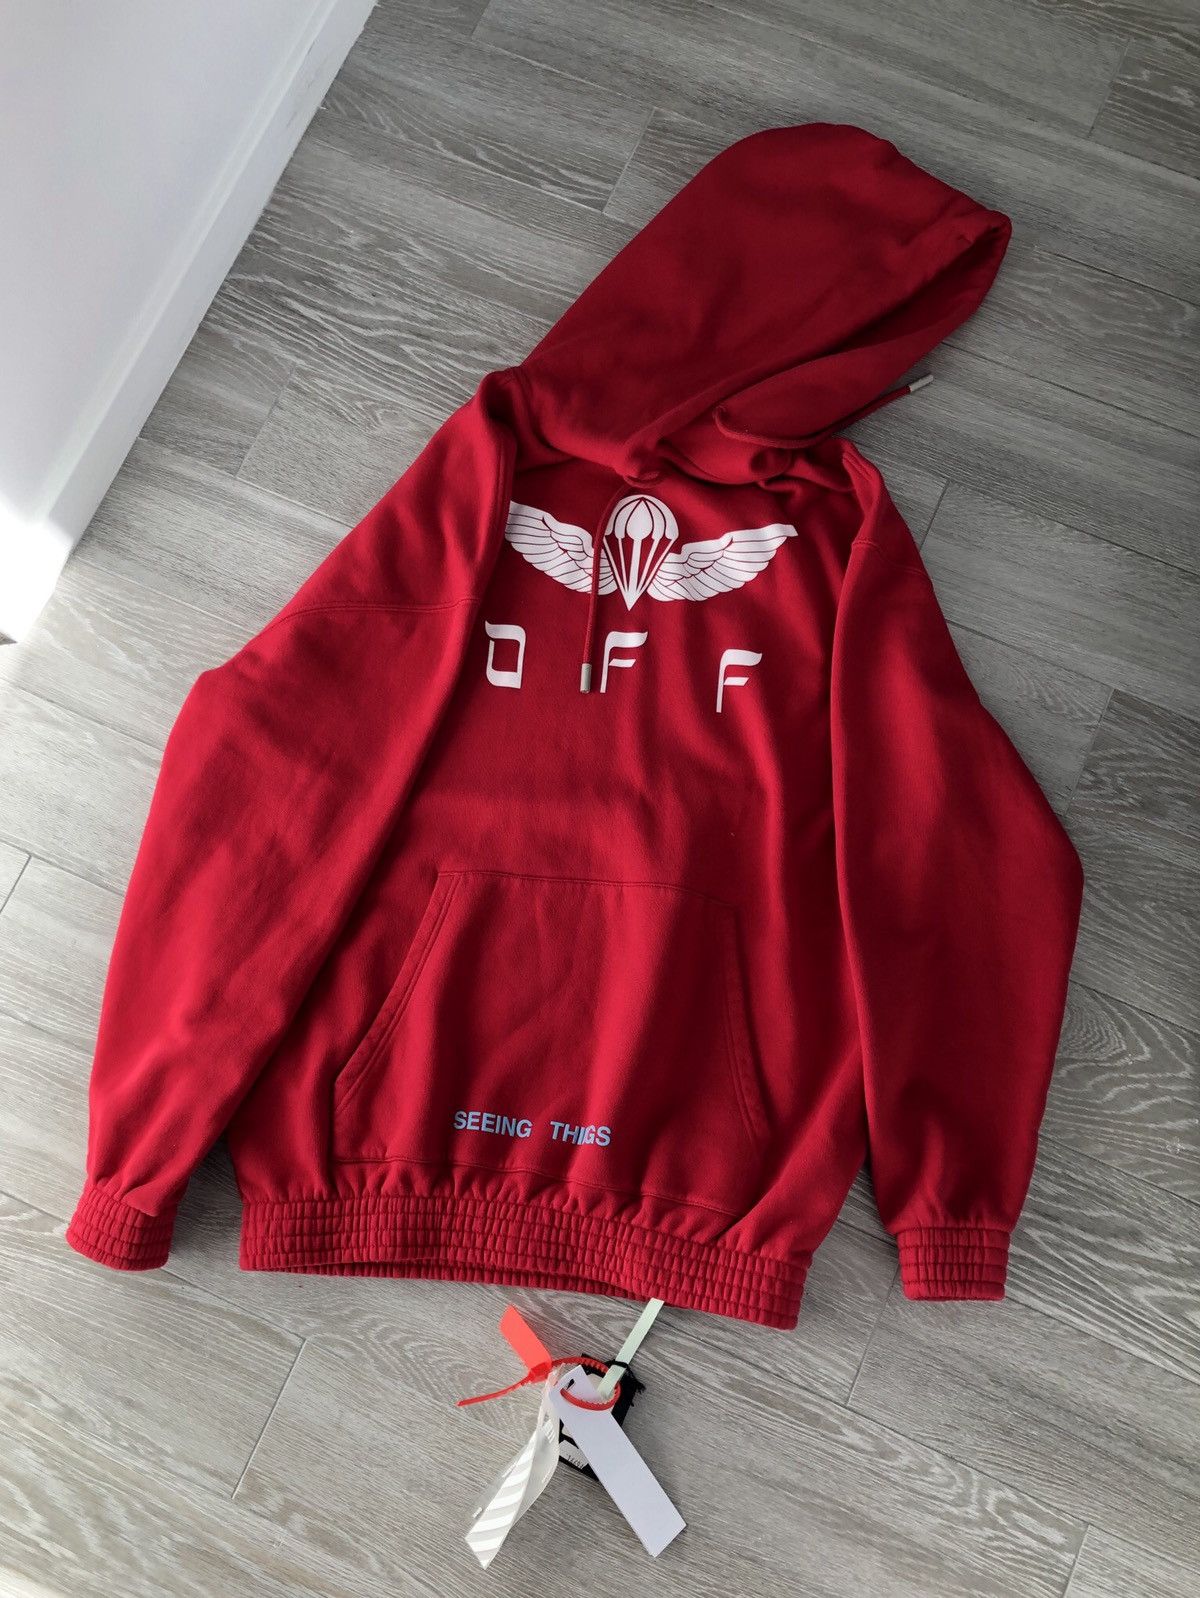 Off-White Off-White “SEEING THINGS” hoodie Size US M / EU 48-50 / 2 - 1 Preview